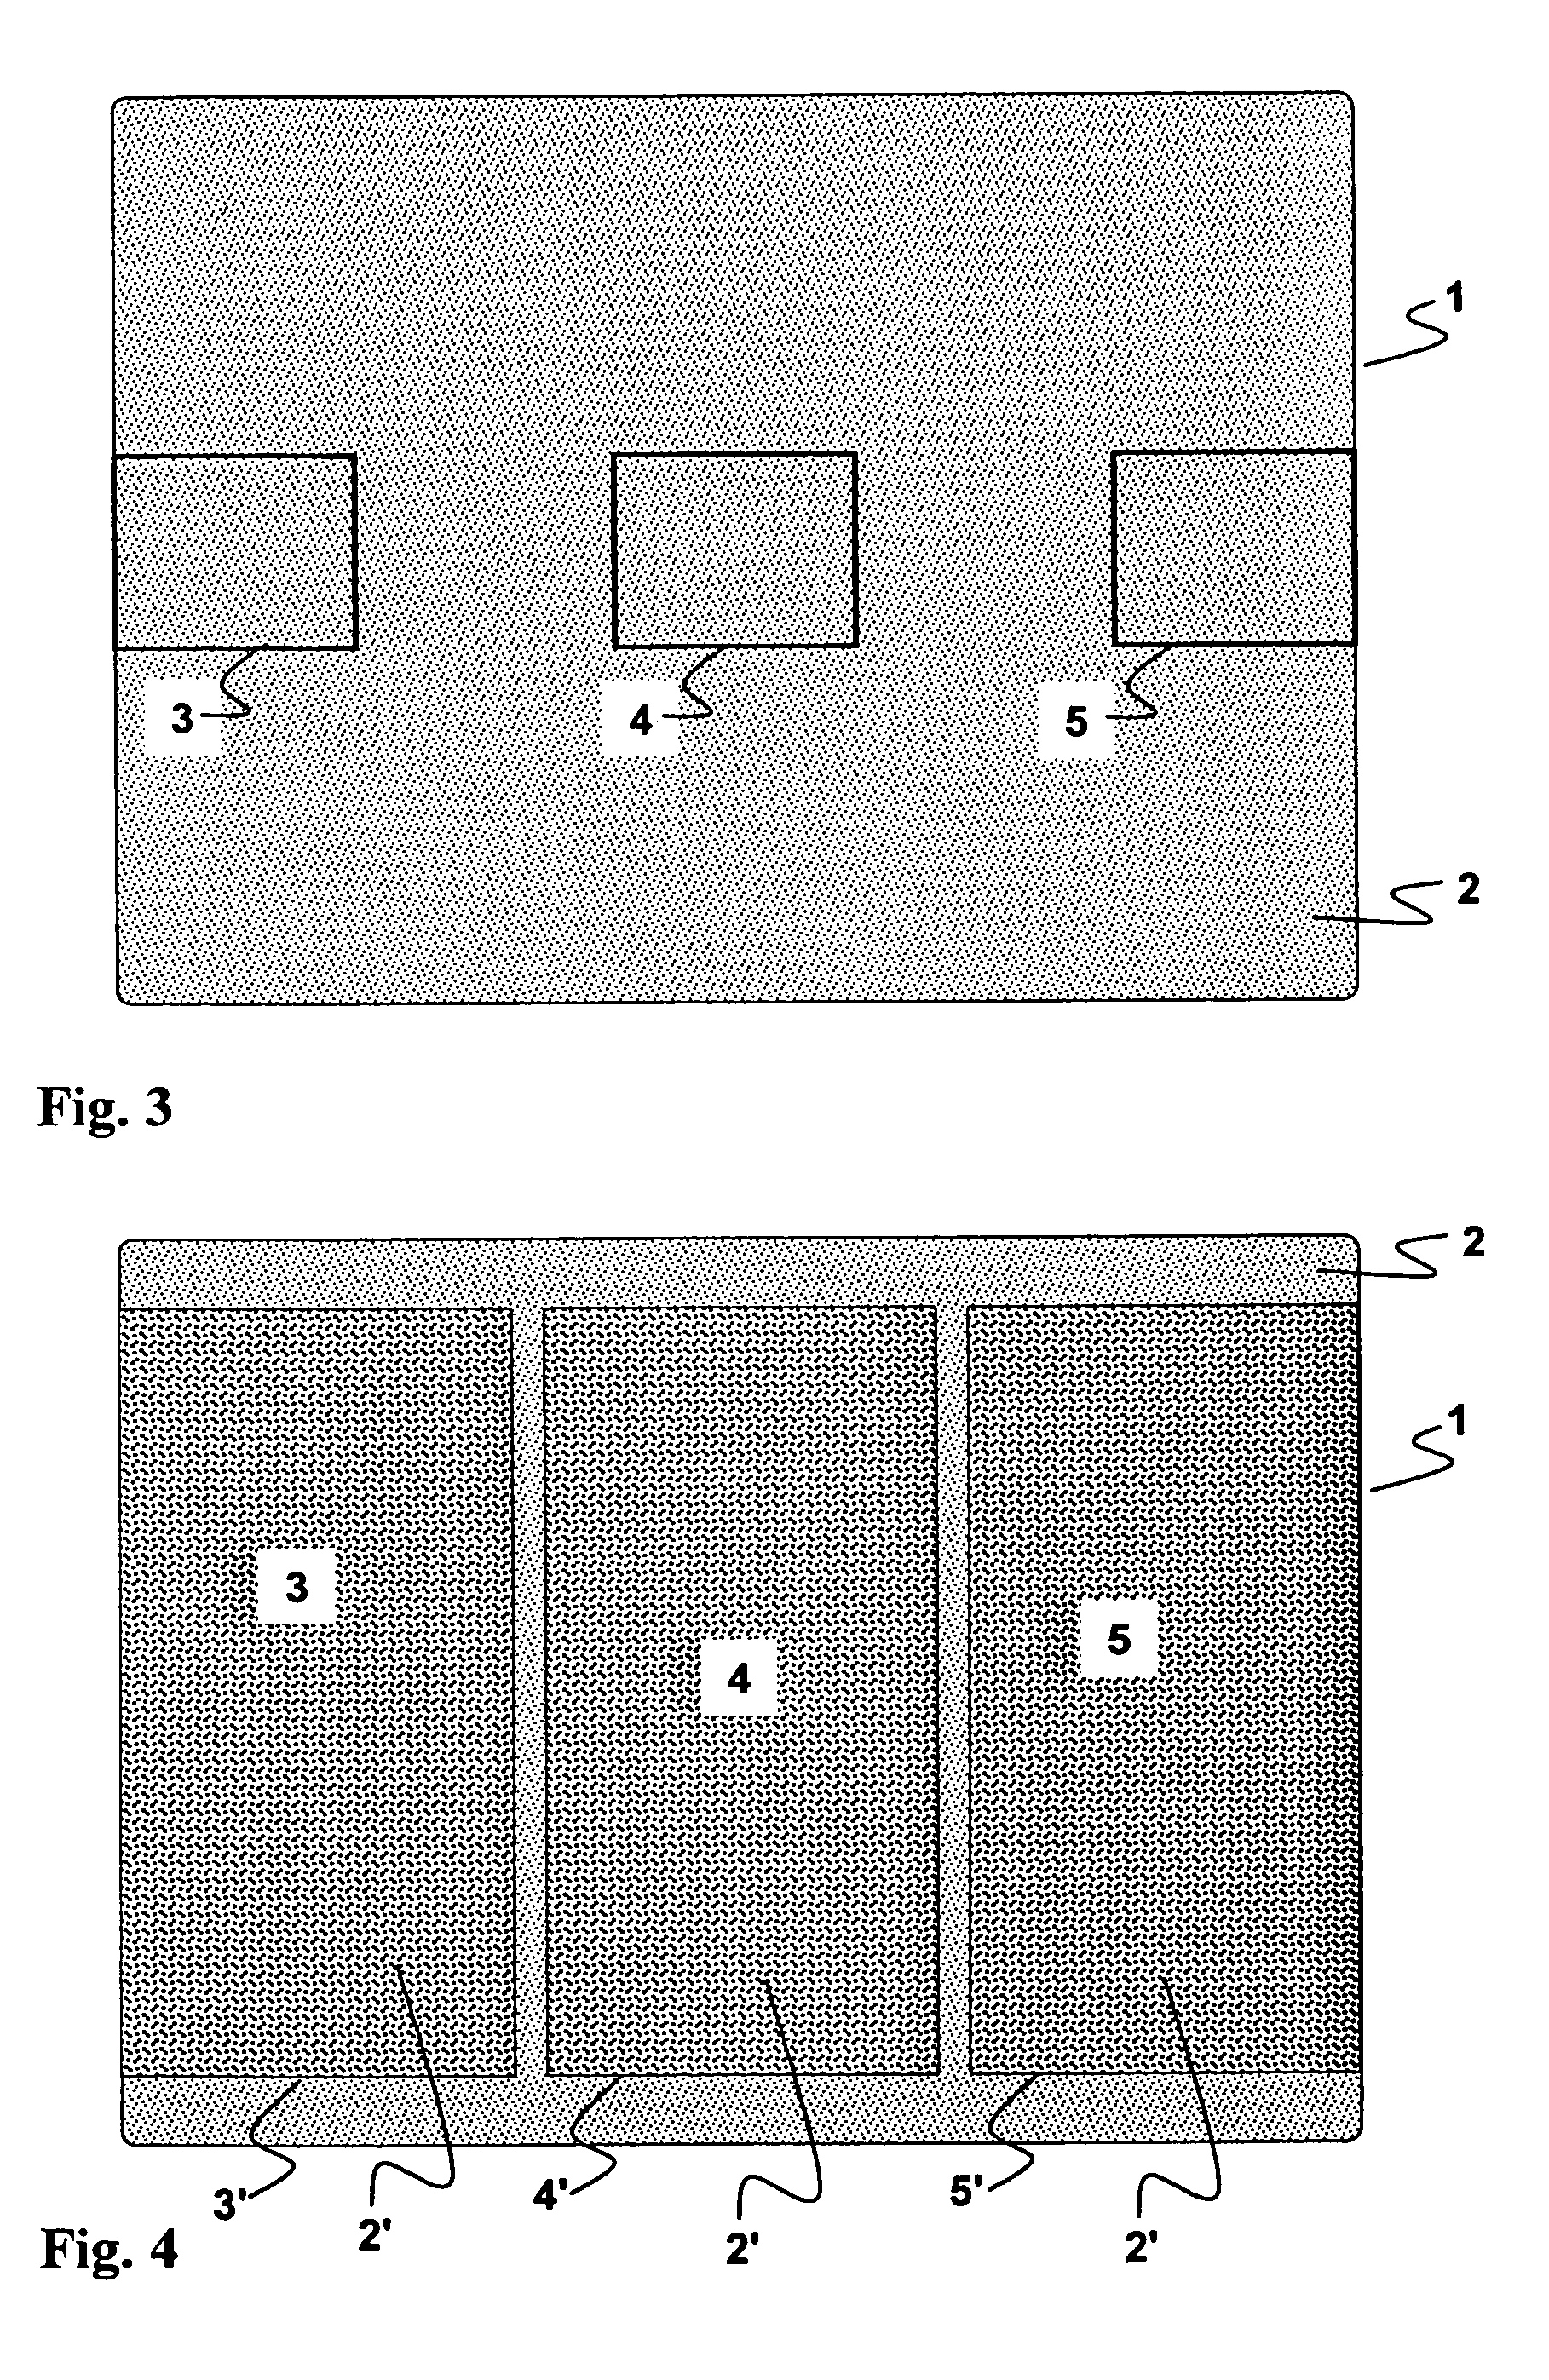 Method for focusing a film scanner and film scanner for carrying out the method